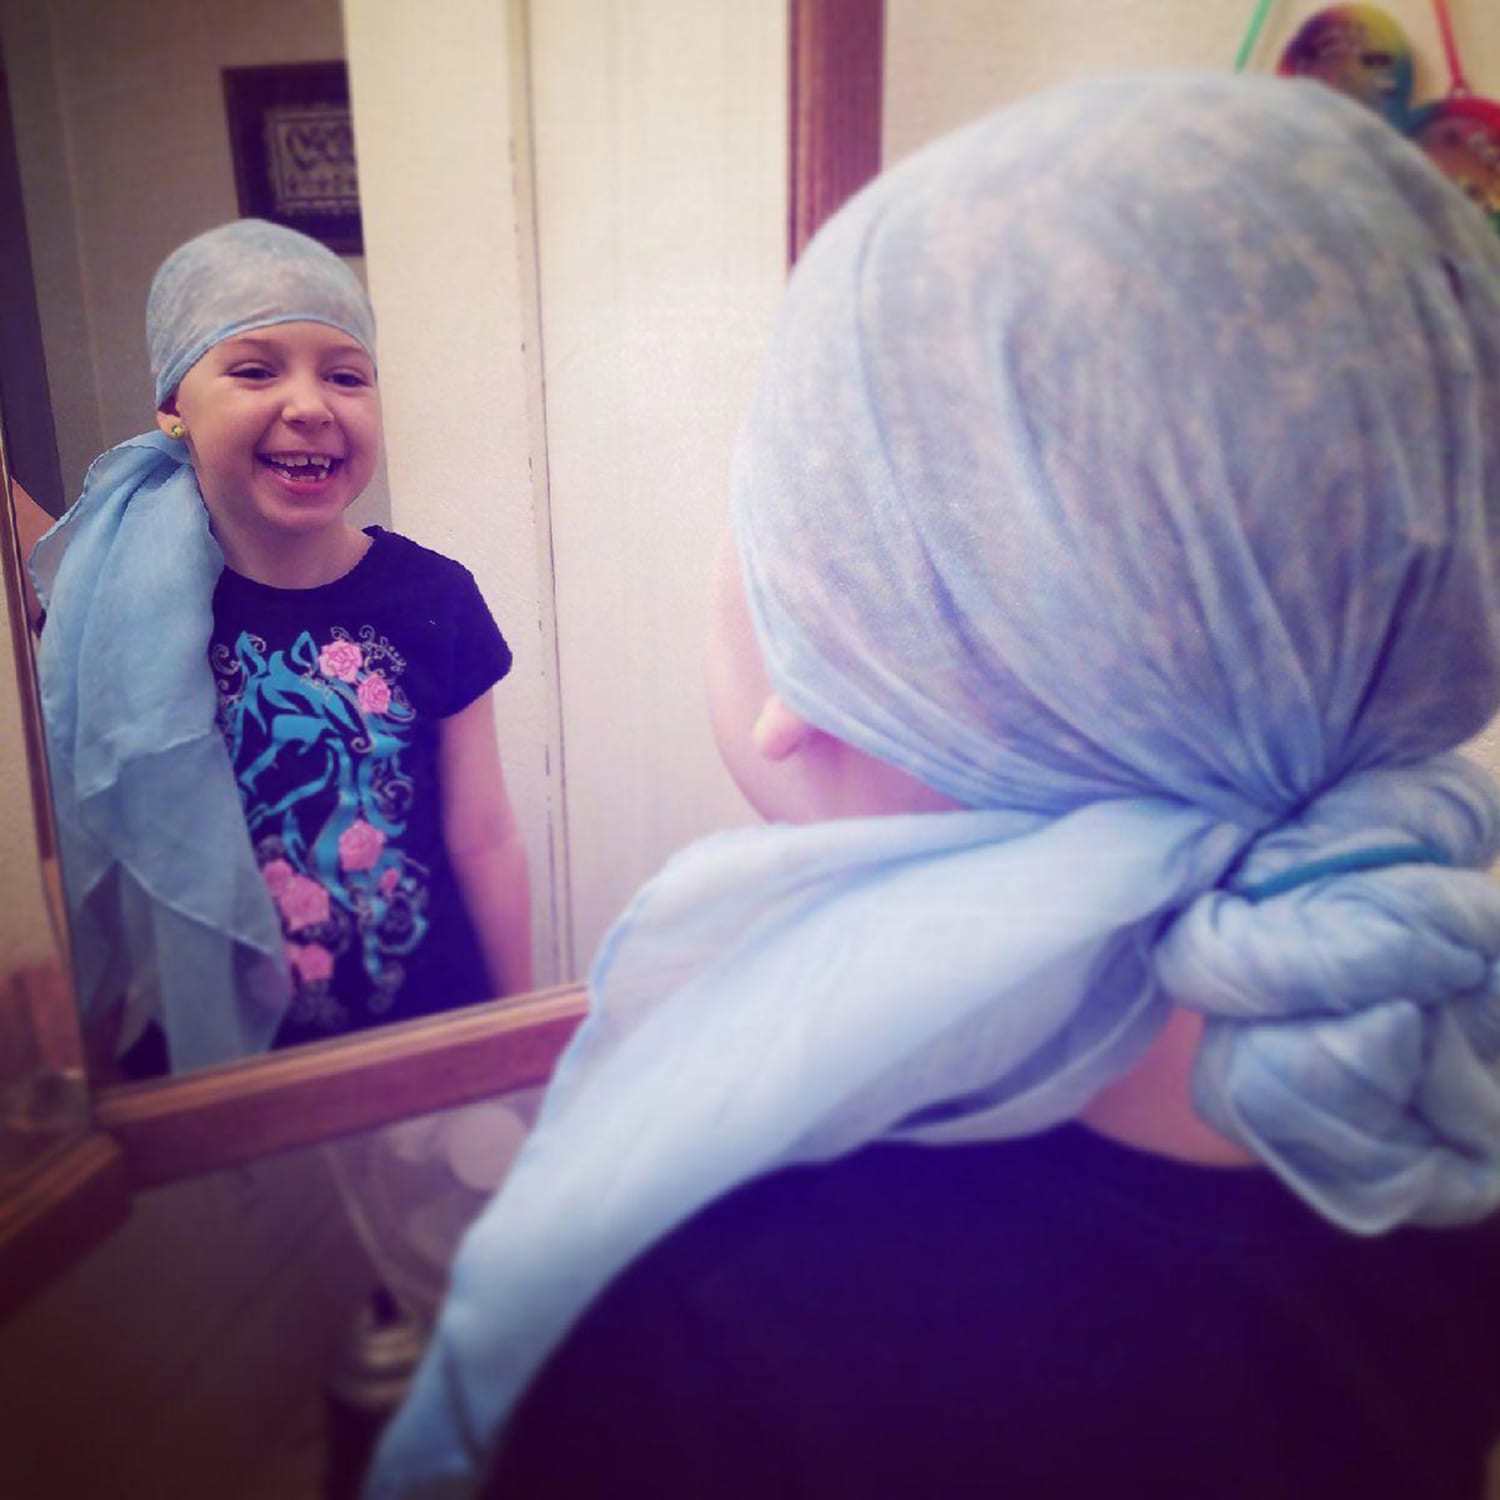 This is awesome': Girl, 7, with alopecia wins crazy hair day